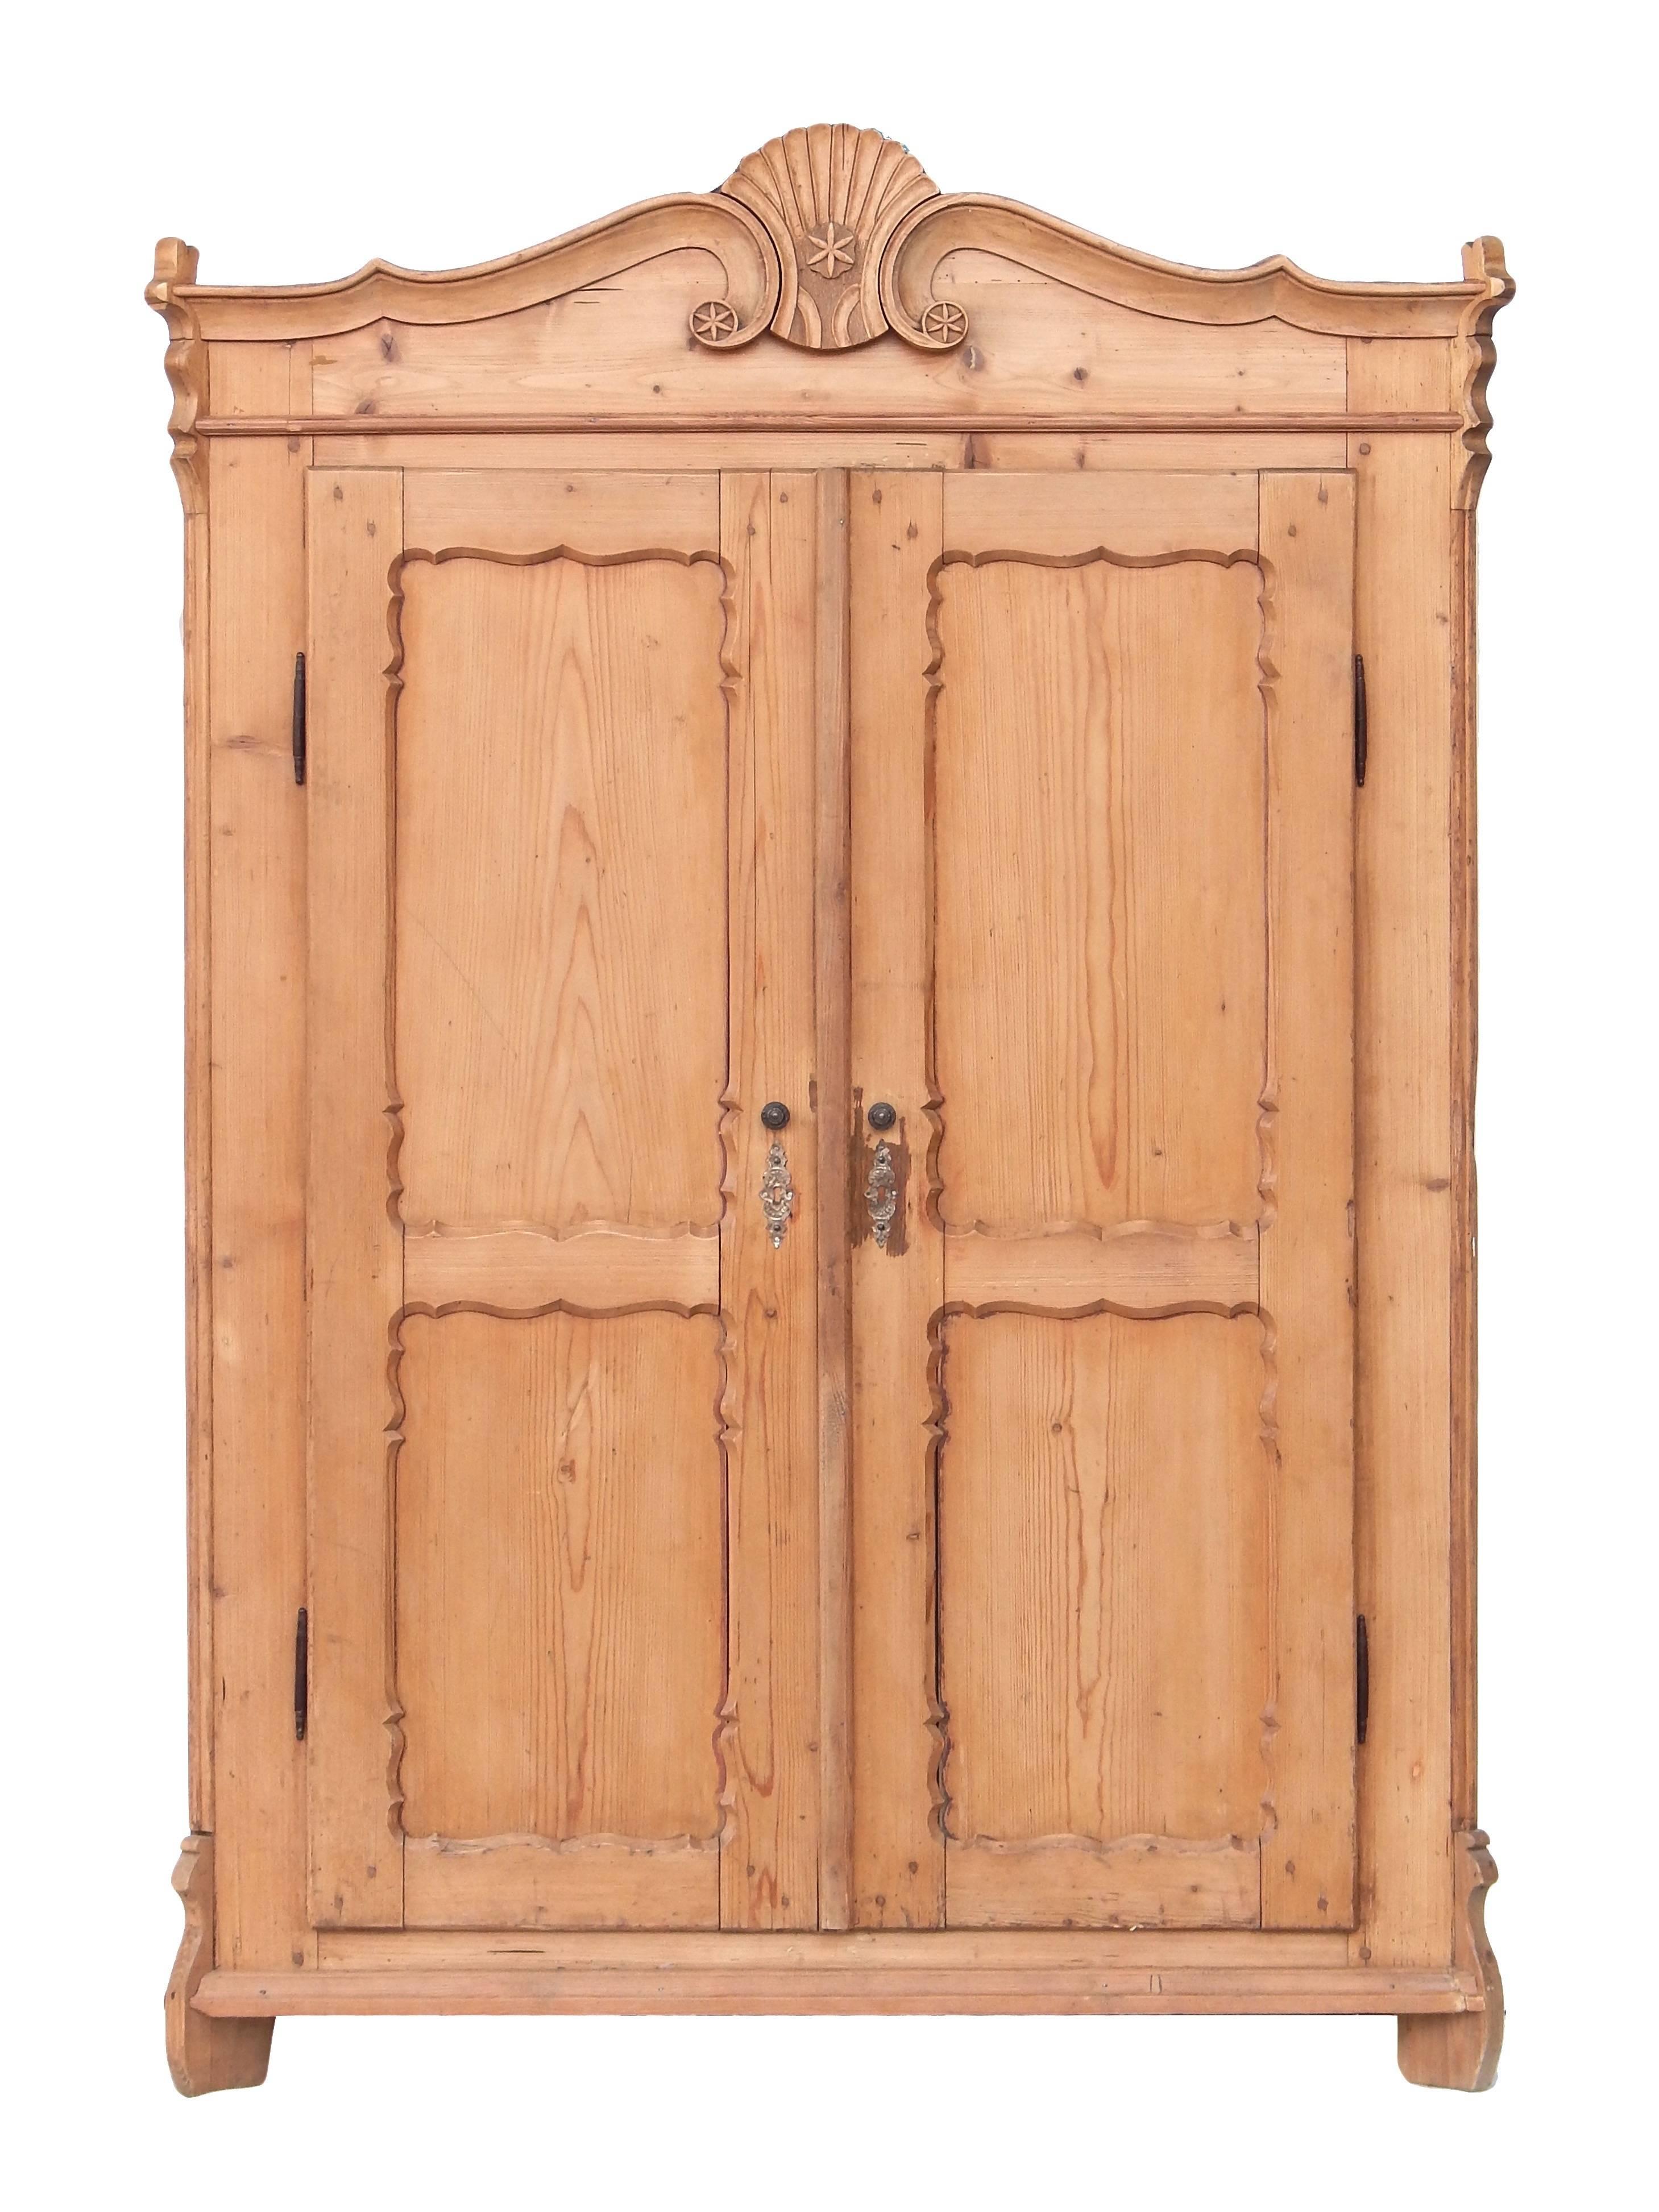 Beautifully detailed European pine double door armoire with shelves and room for hanging (there are pegs but we can install a bar if desired). This is a small scale piece that would be perfect in a guest or child's room.